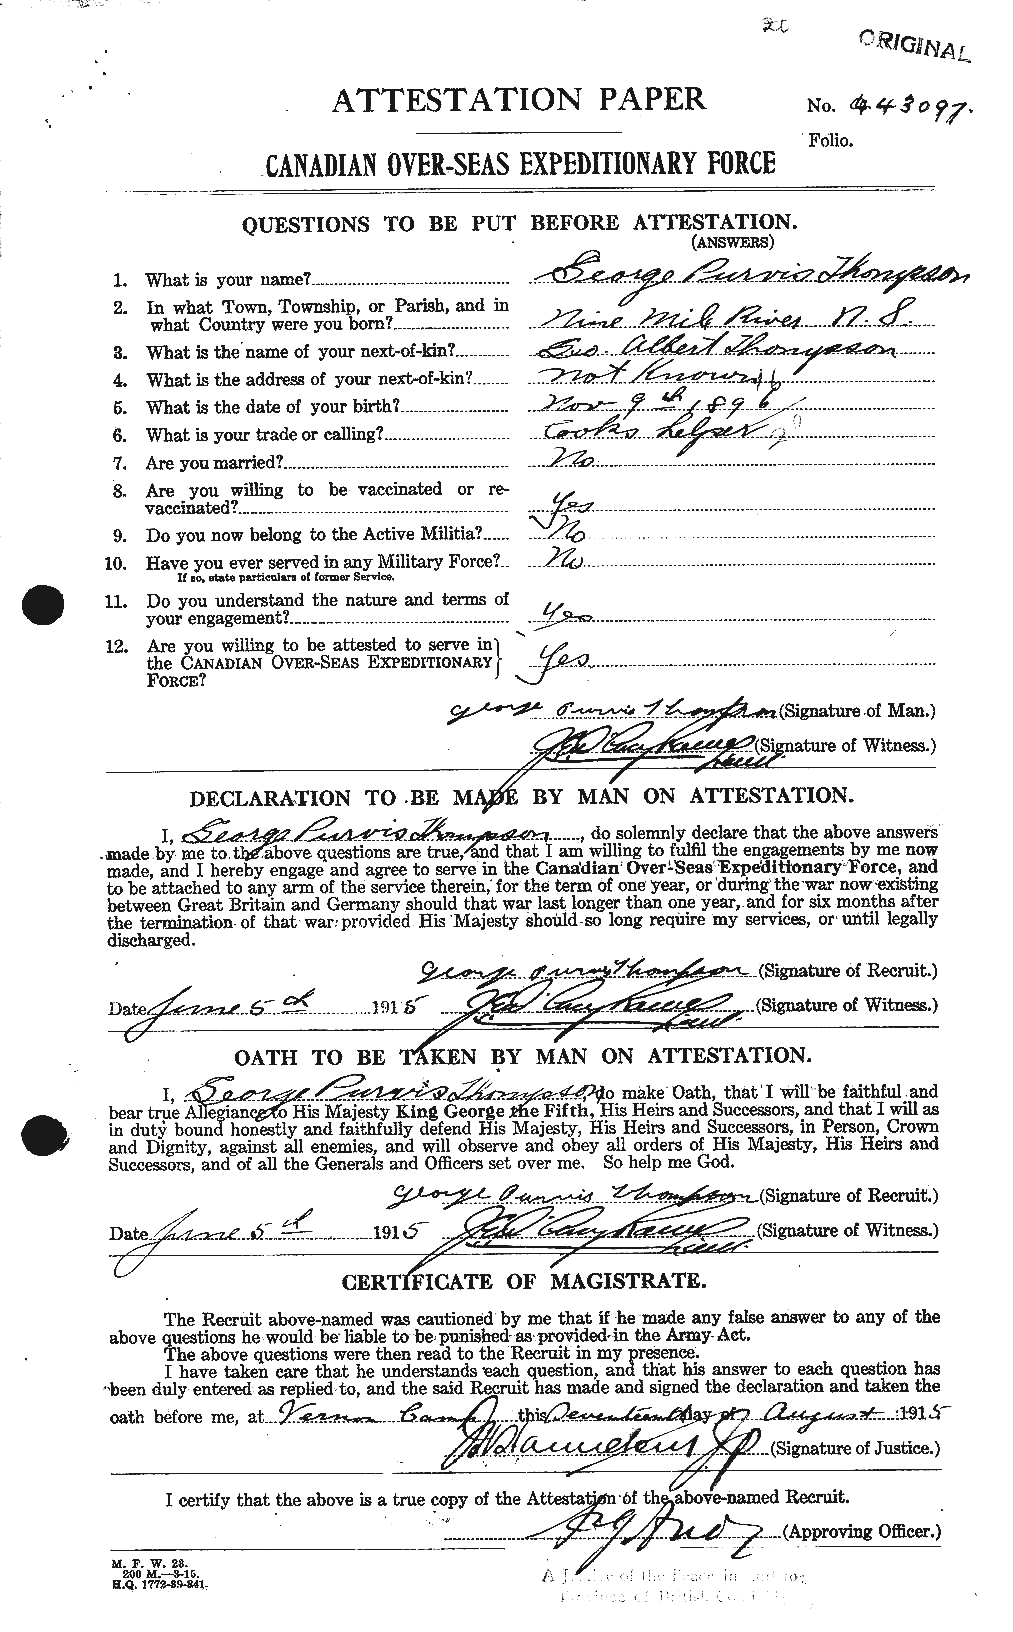 Personnel Records of the First World War - CEF 633122a